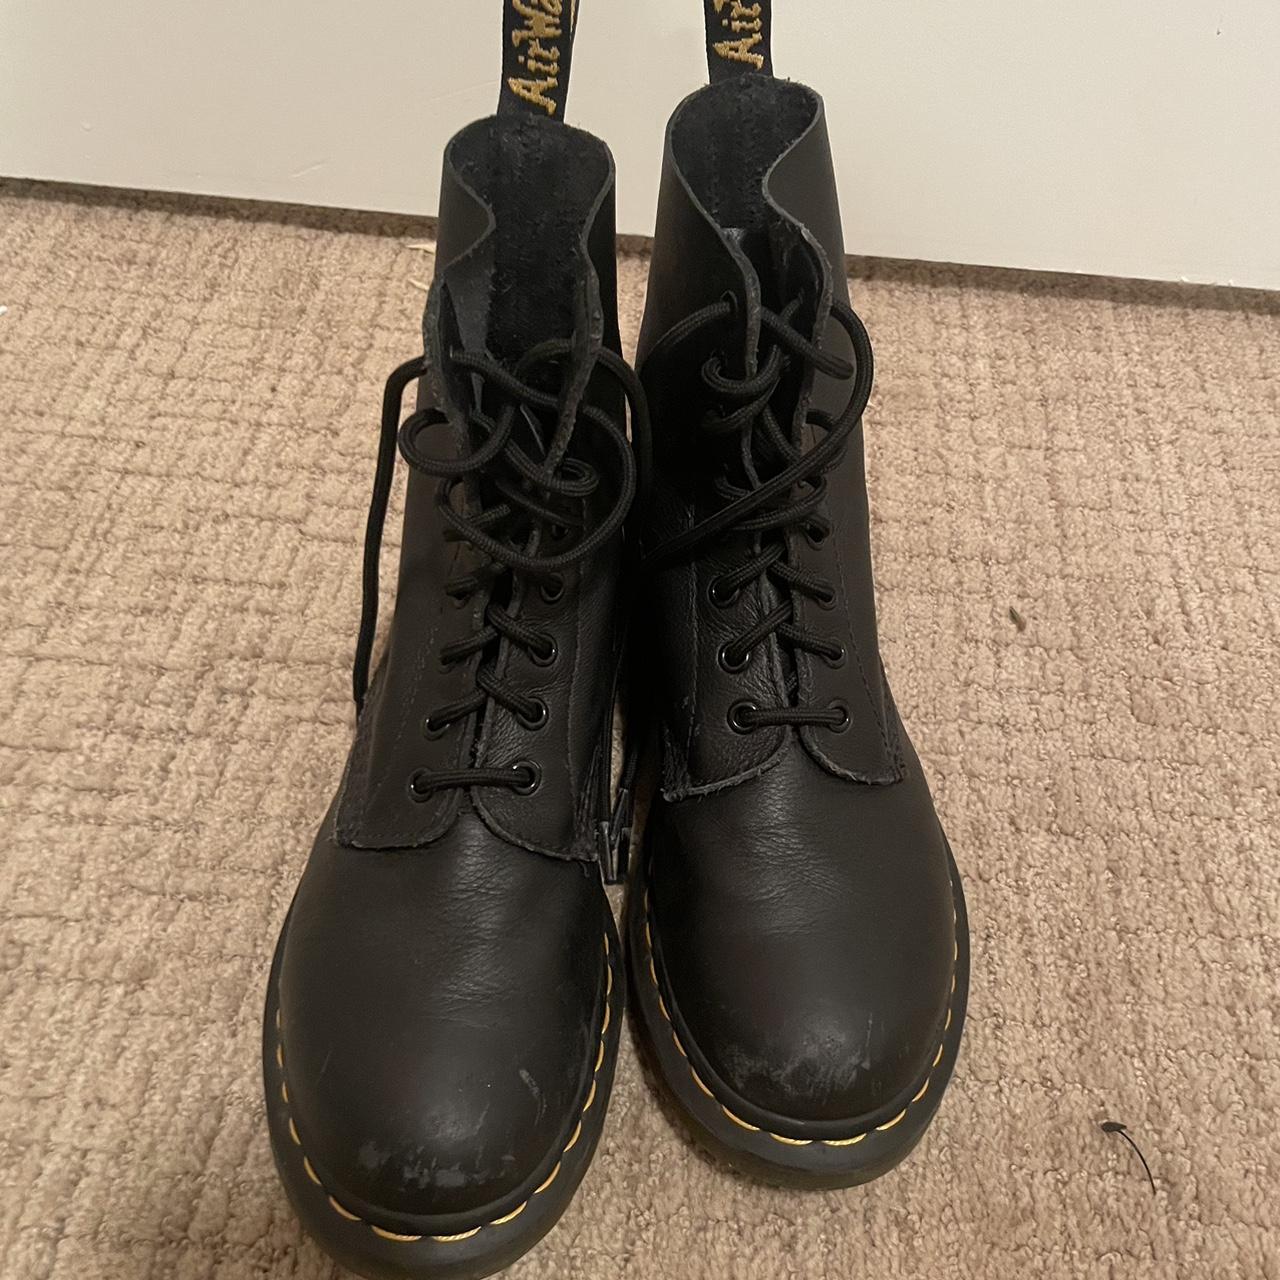 Black, size 8 doc martens, perfect condition, barely... - Depop